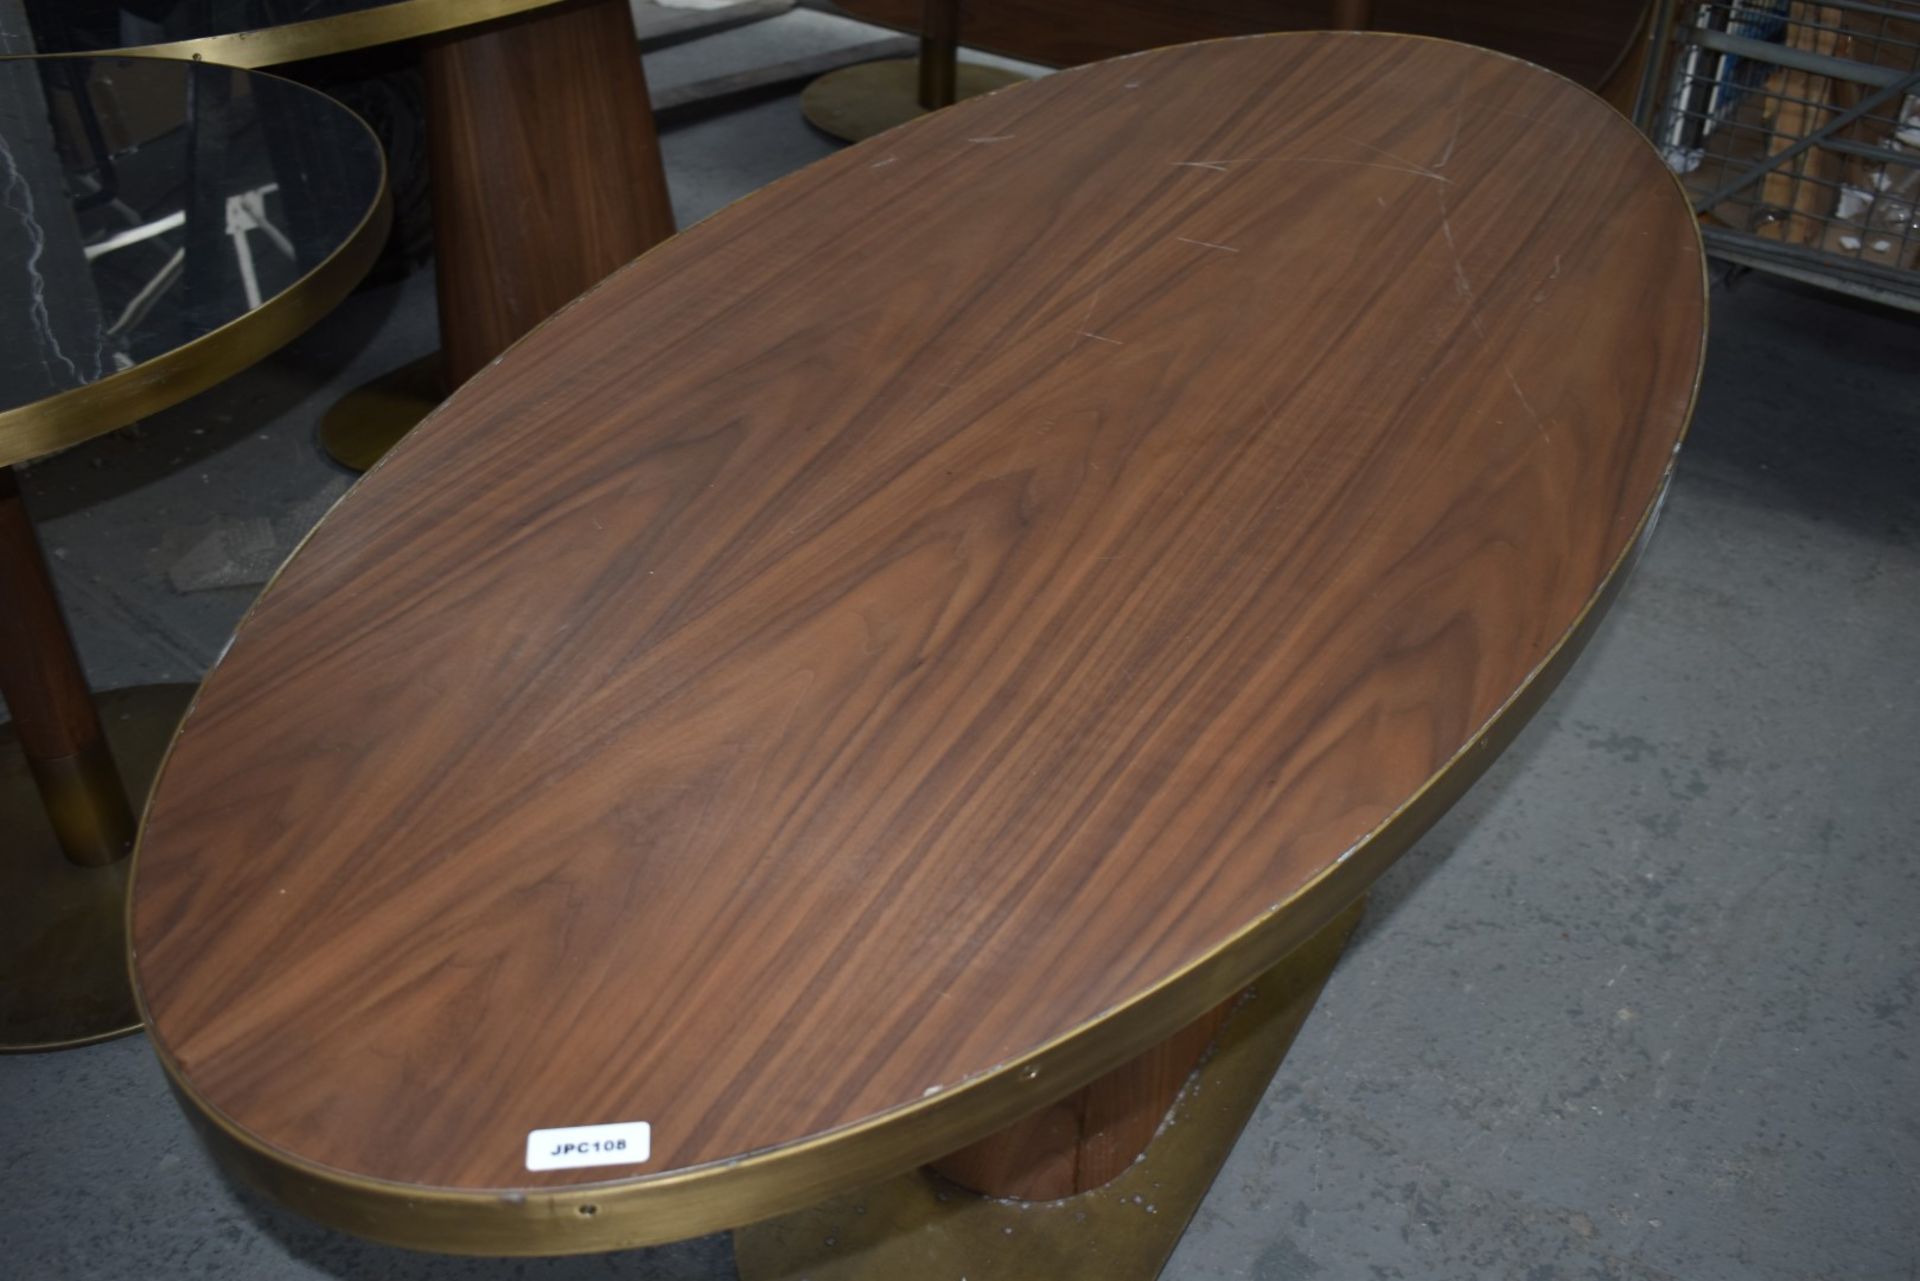 1 x Oval Banqueting Dining Table By AKP Design Athens - Walnut Top With Antique Brass Edging - Image 4 of 7